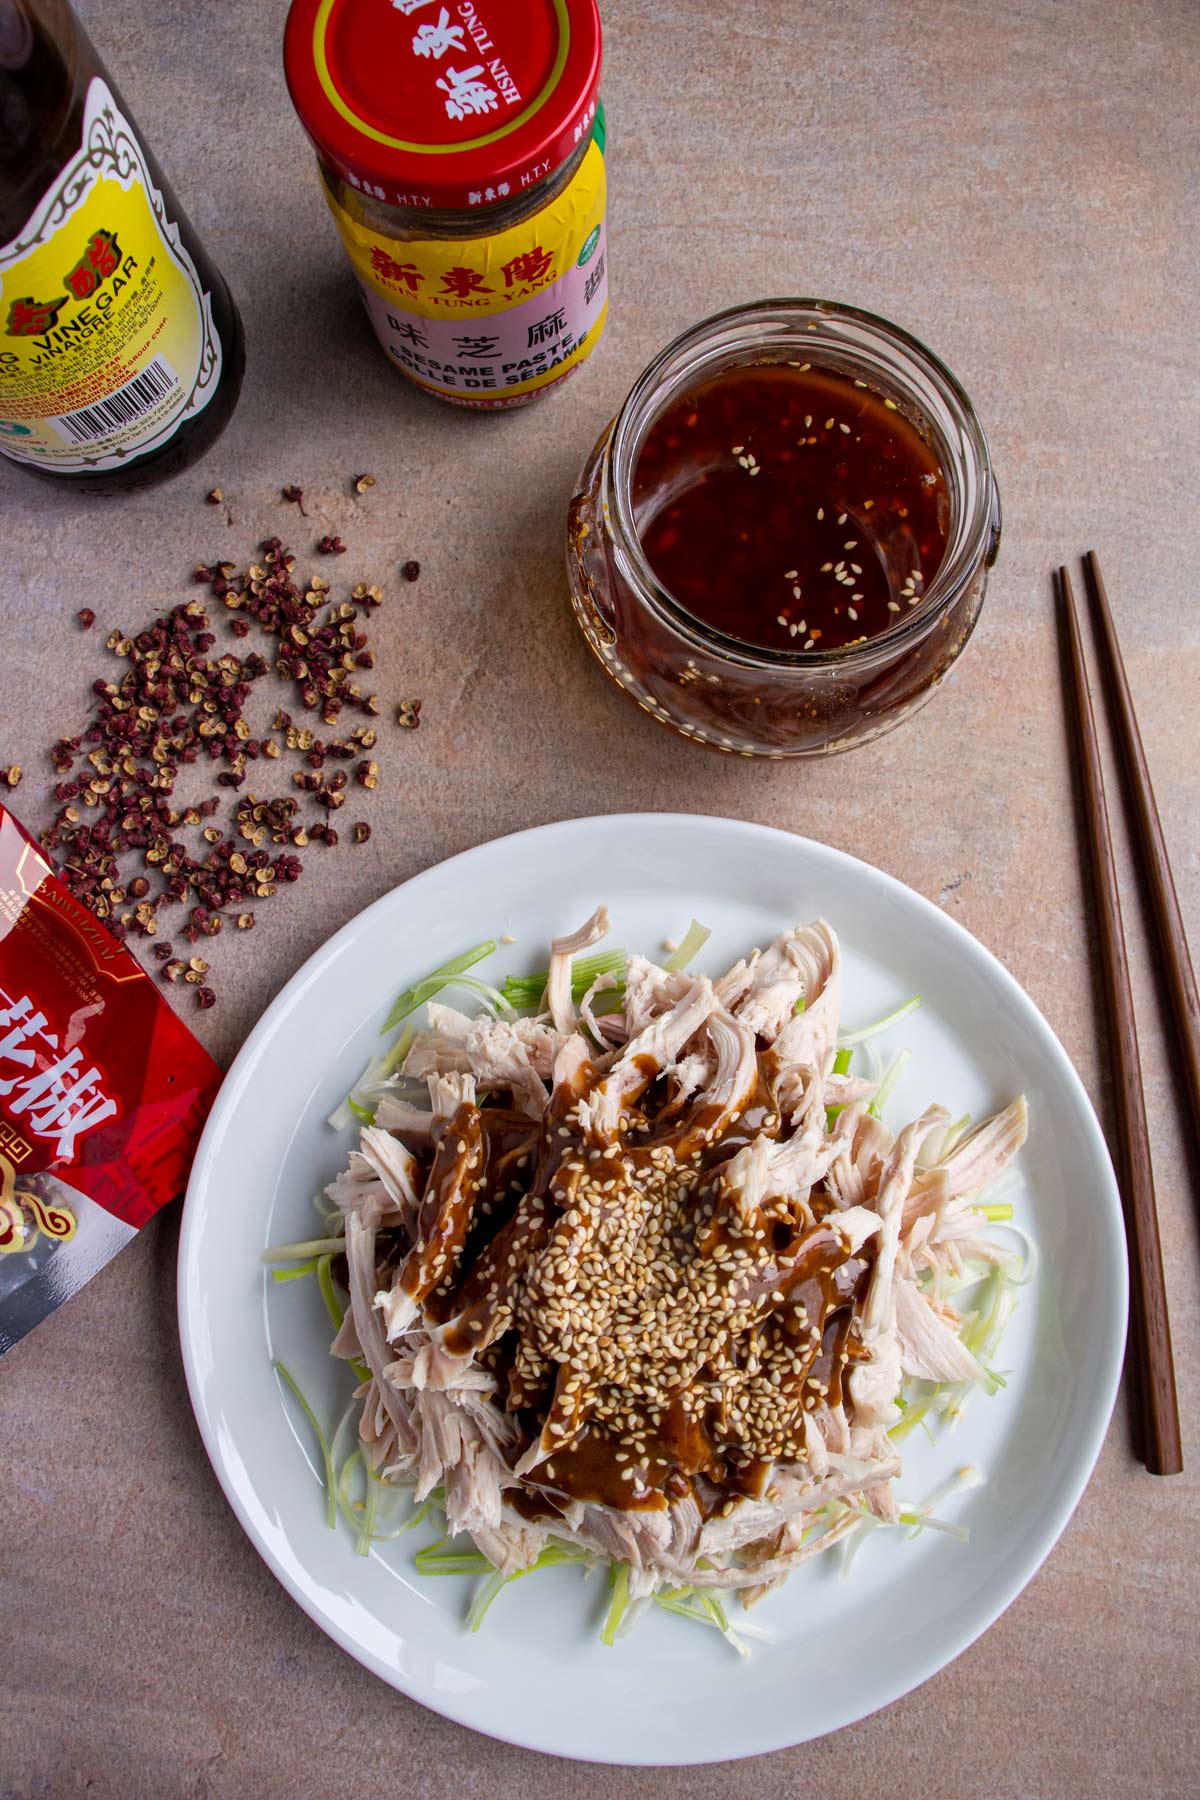 A plate of bang bang chicken surrounded by jars of sauce, Sichuan pepper, and chopsticks.